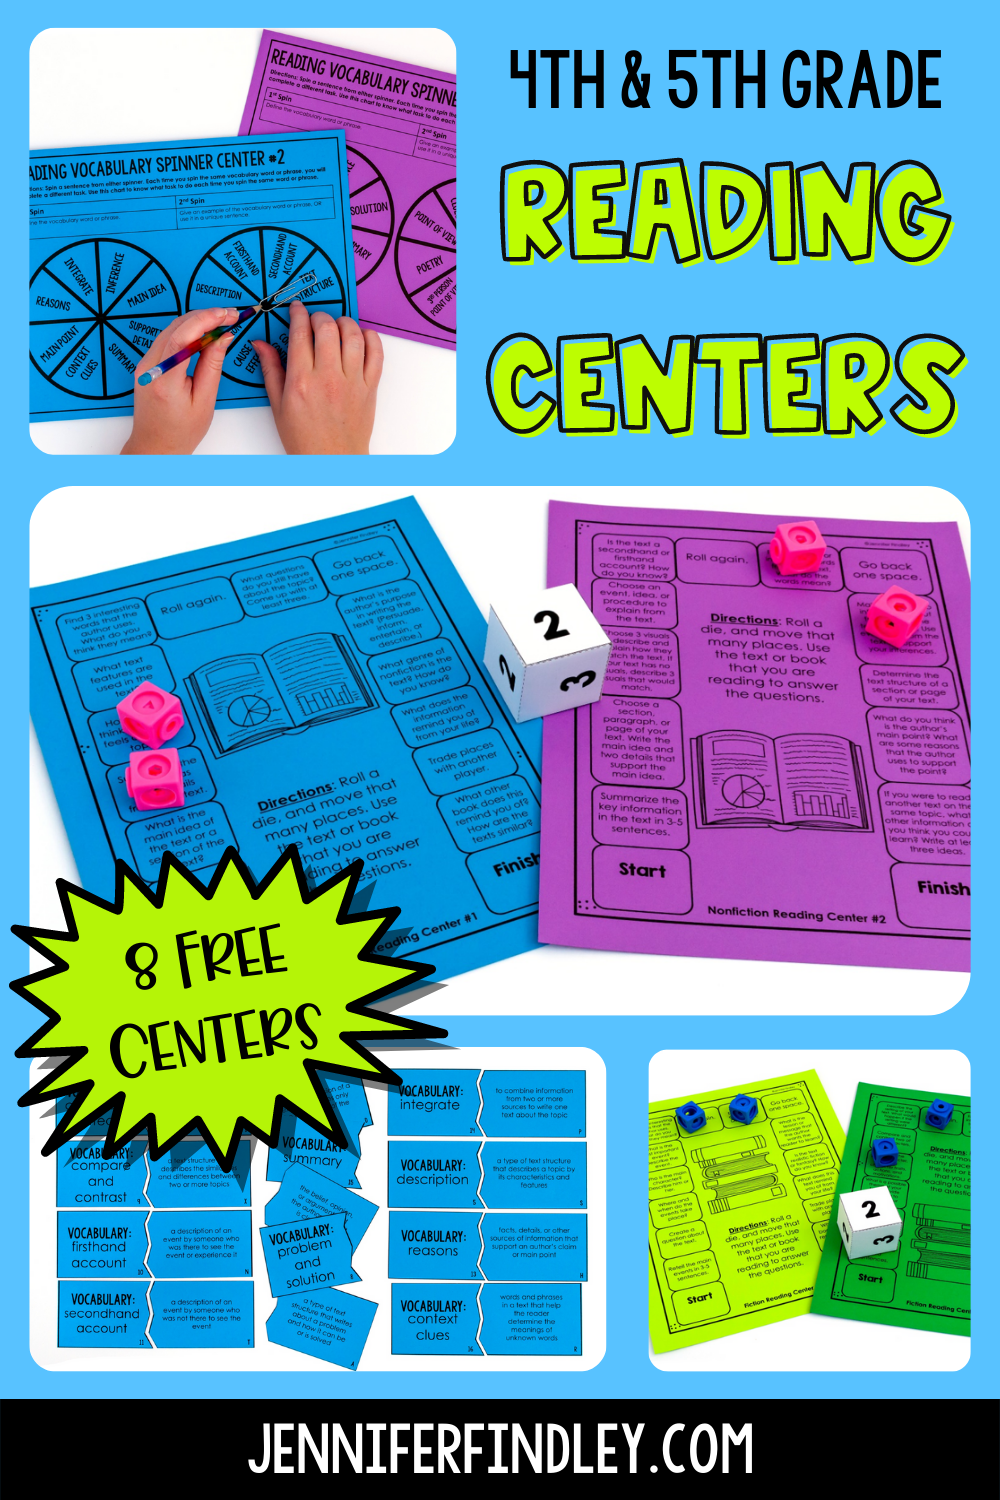 Want some new and engaging reading activities for centers? This post shares three types of reading games and centers that 4th and 5th graders will love. Also, sign up for the email list to get EIGHT free reading games featured in the post.